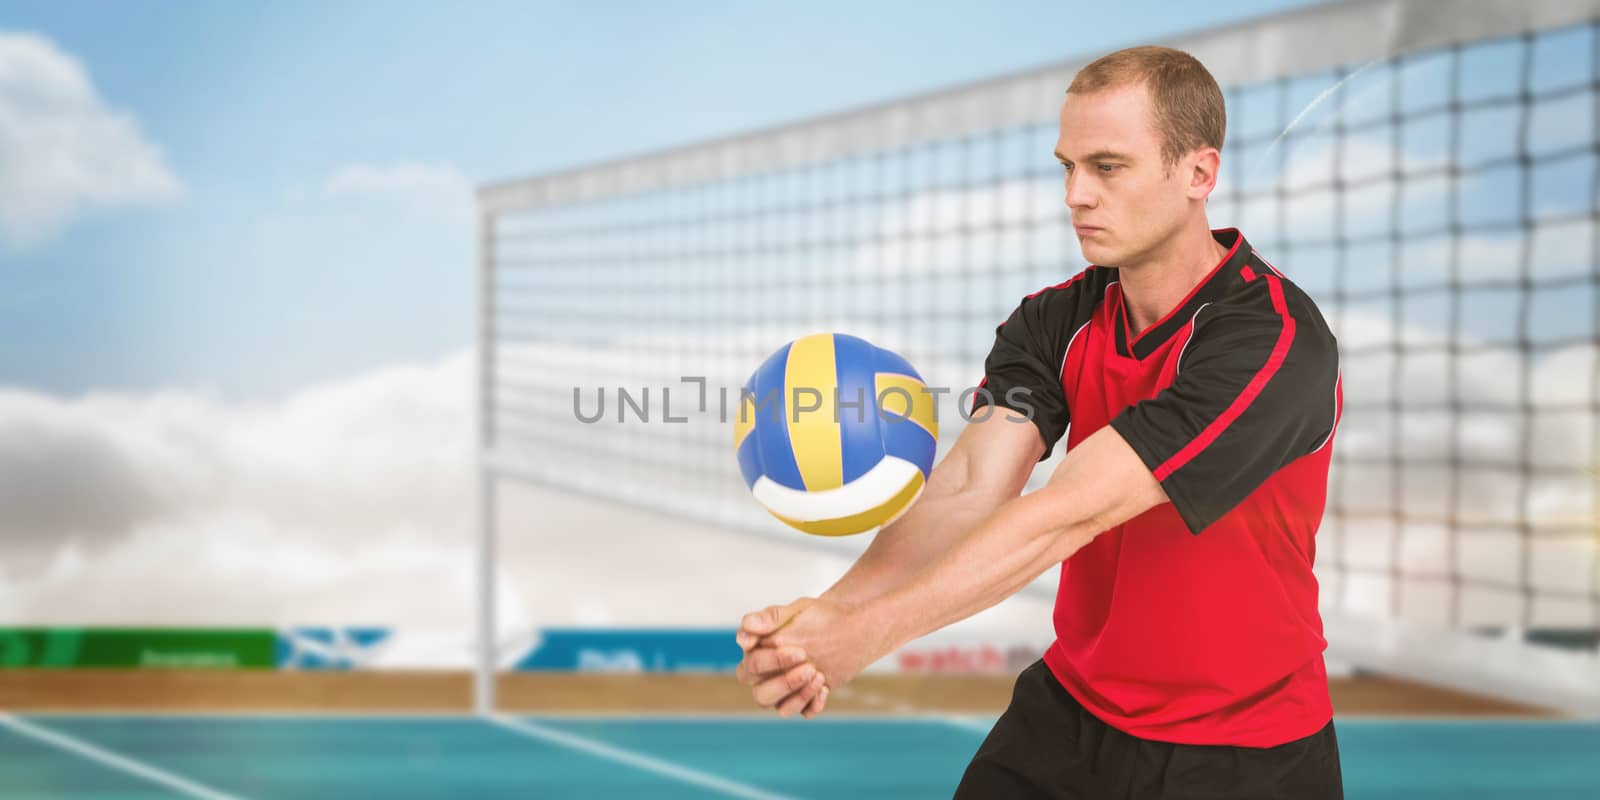 Sportsman playing a volleyball against view of a coloured background